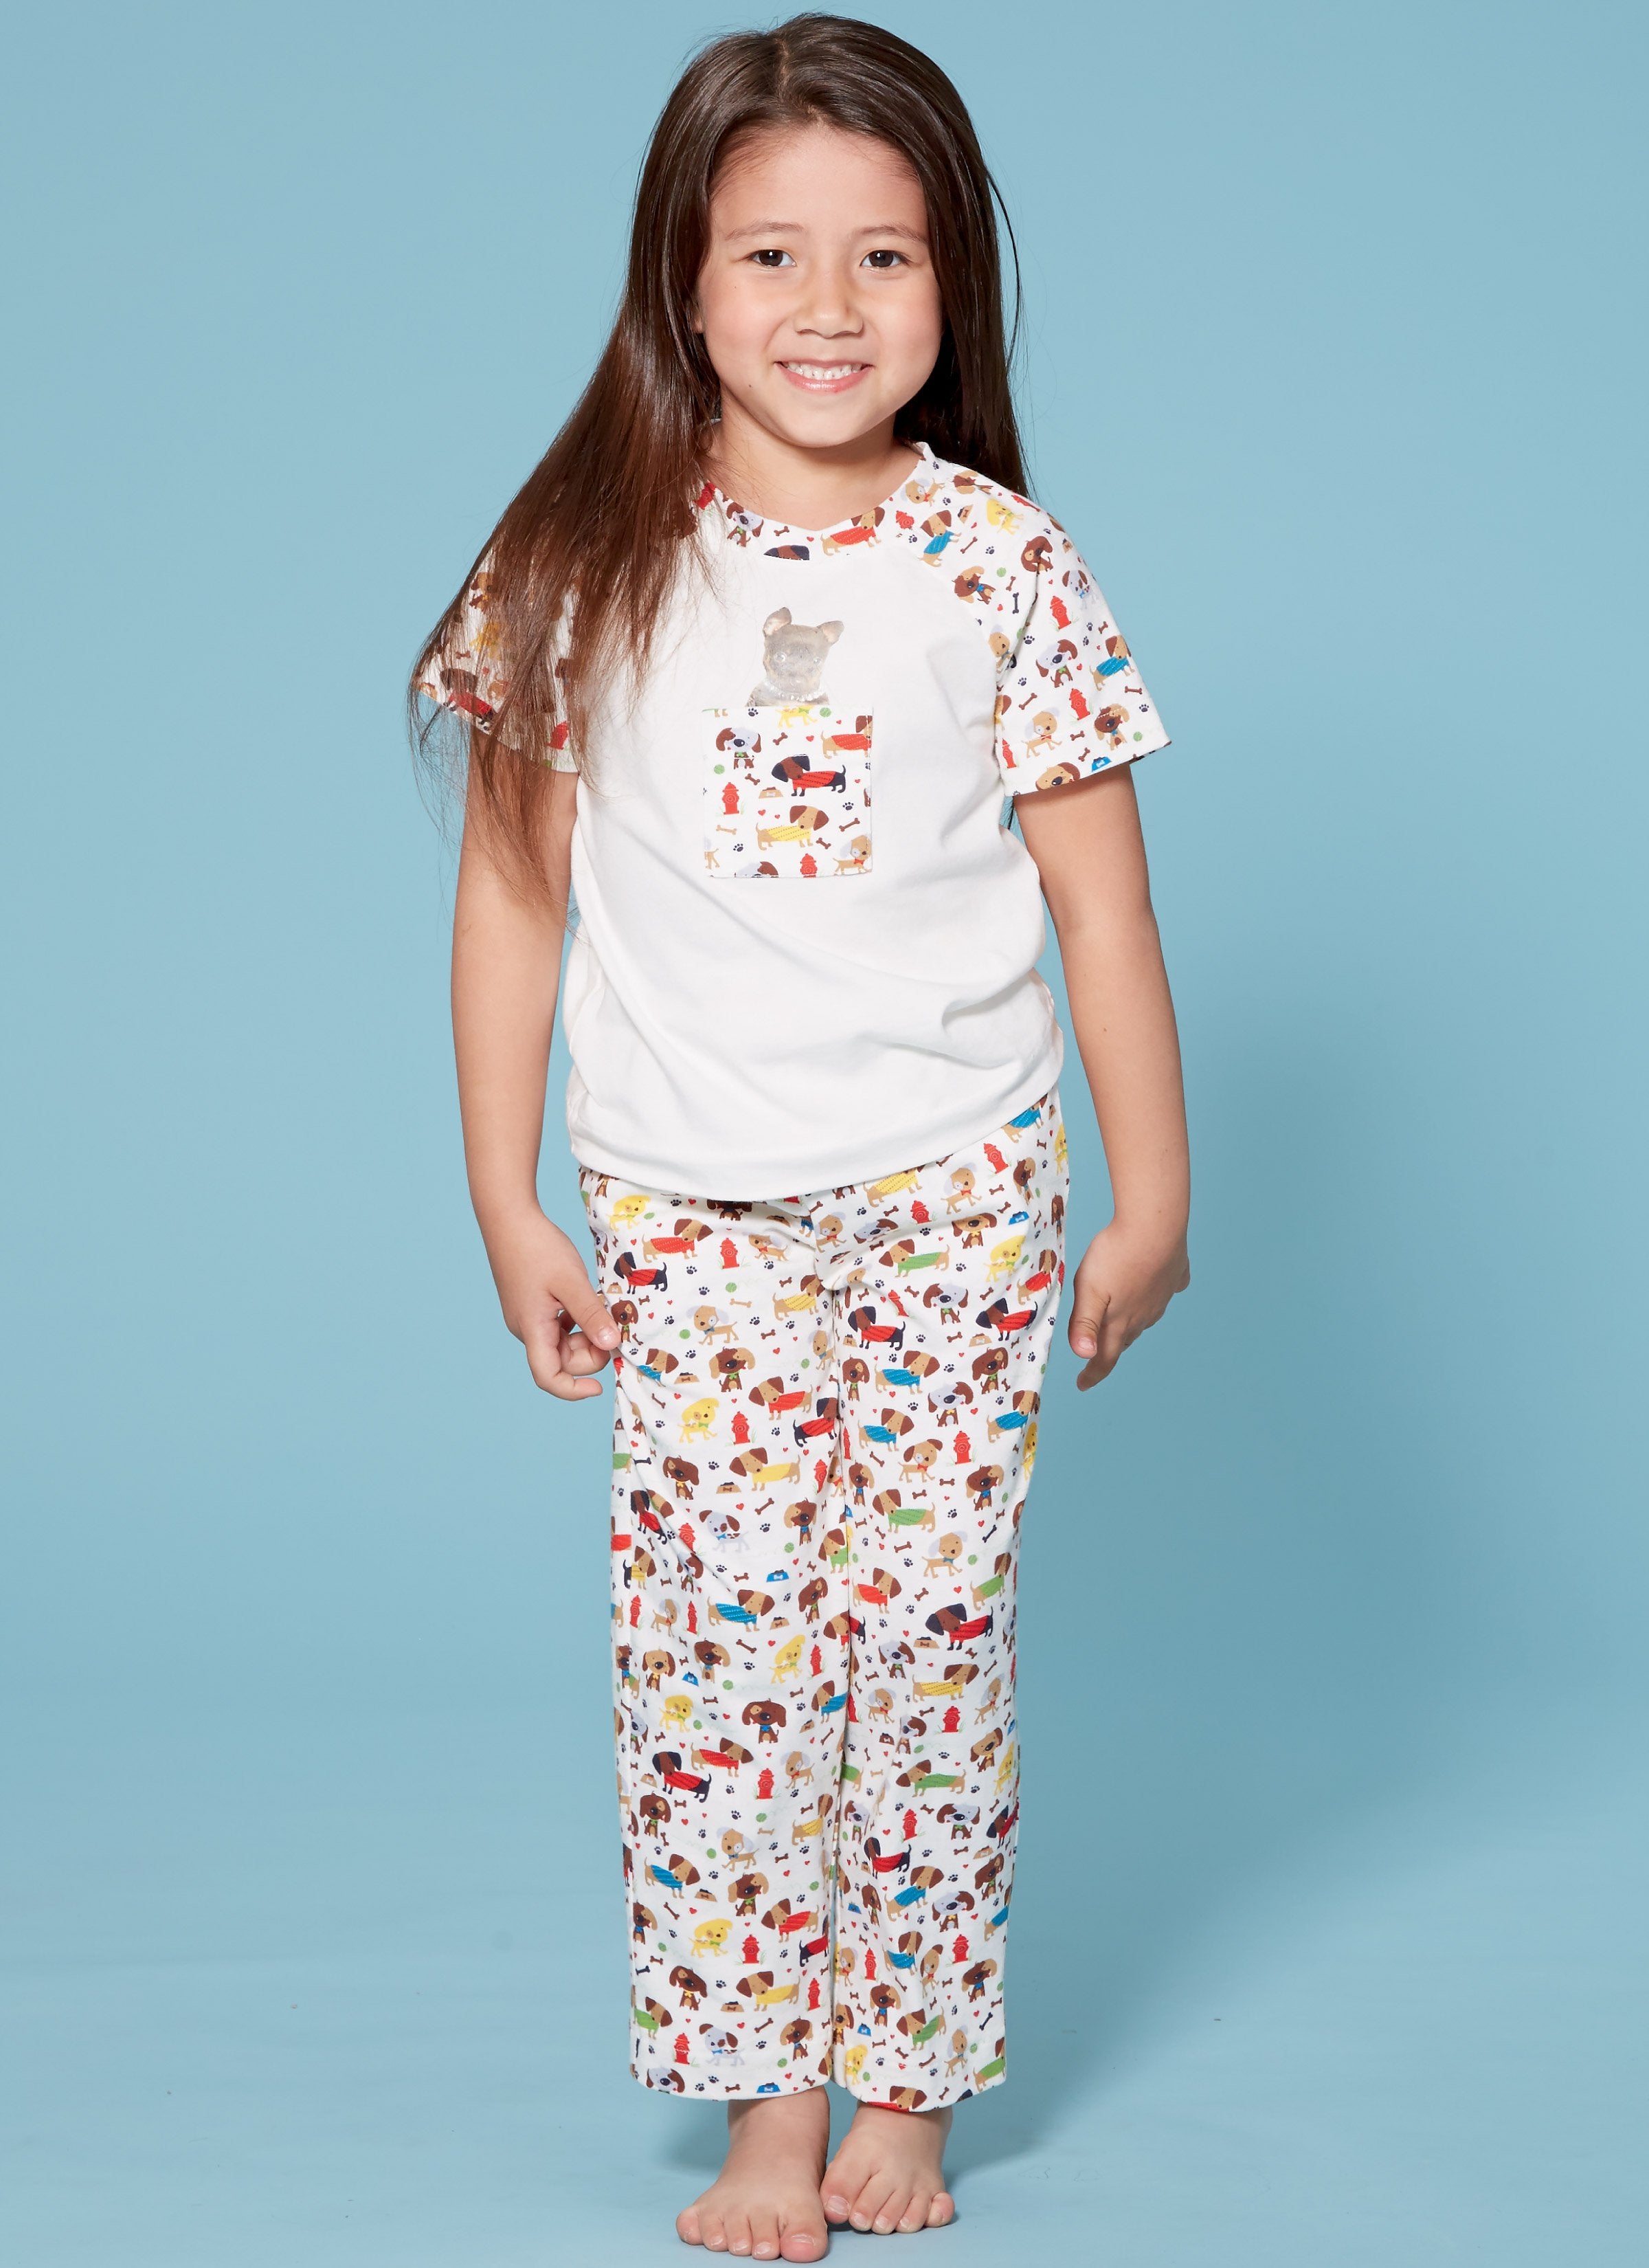 M7678 Children's Animal Themed Tops and Pants from Jaycotts Sewing Supplies